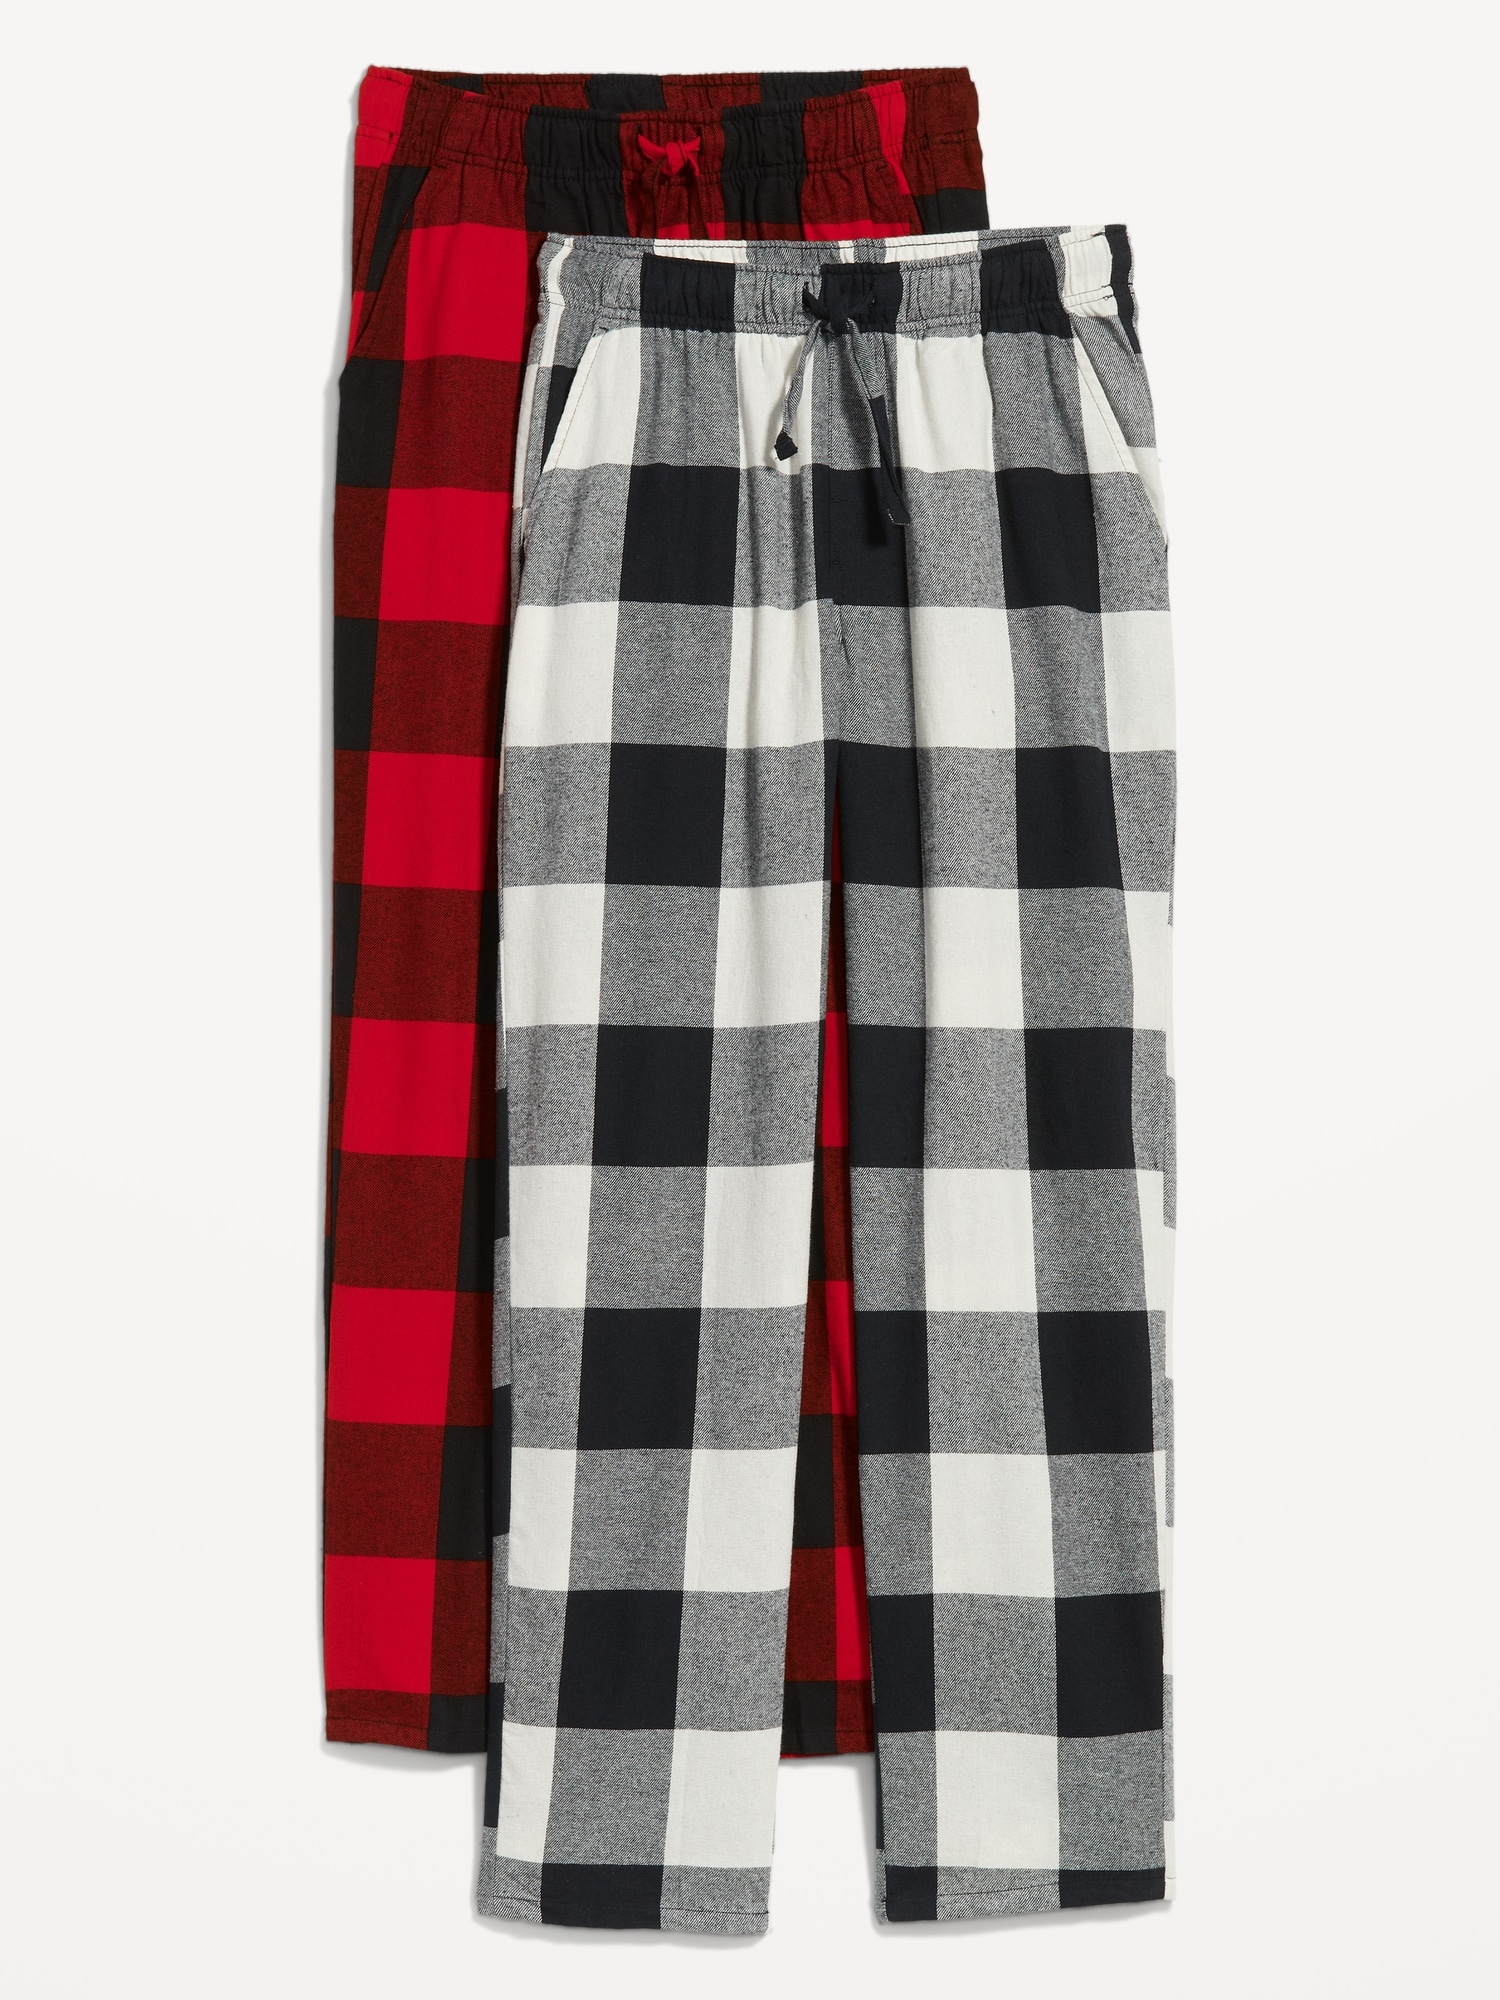 Matching Flannel Pajama Pants 2-Pack